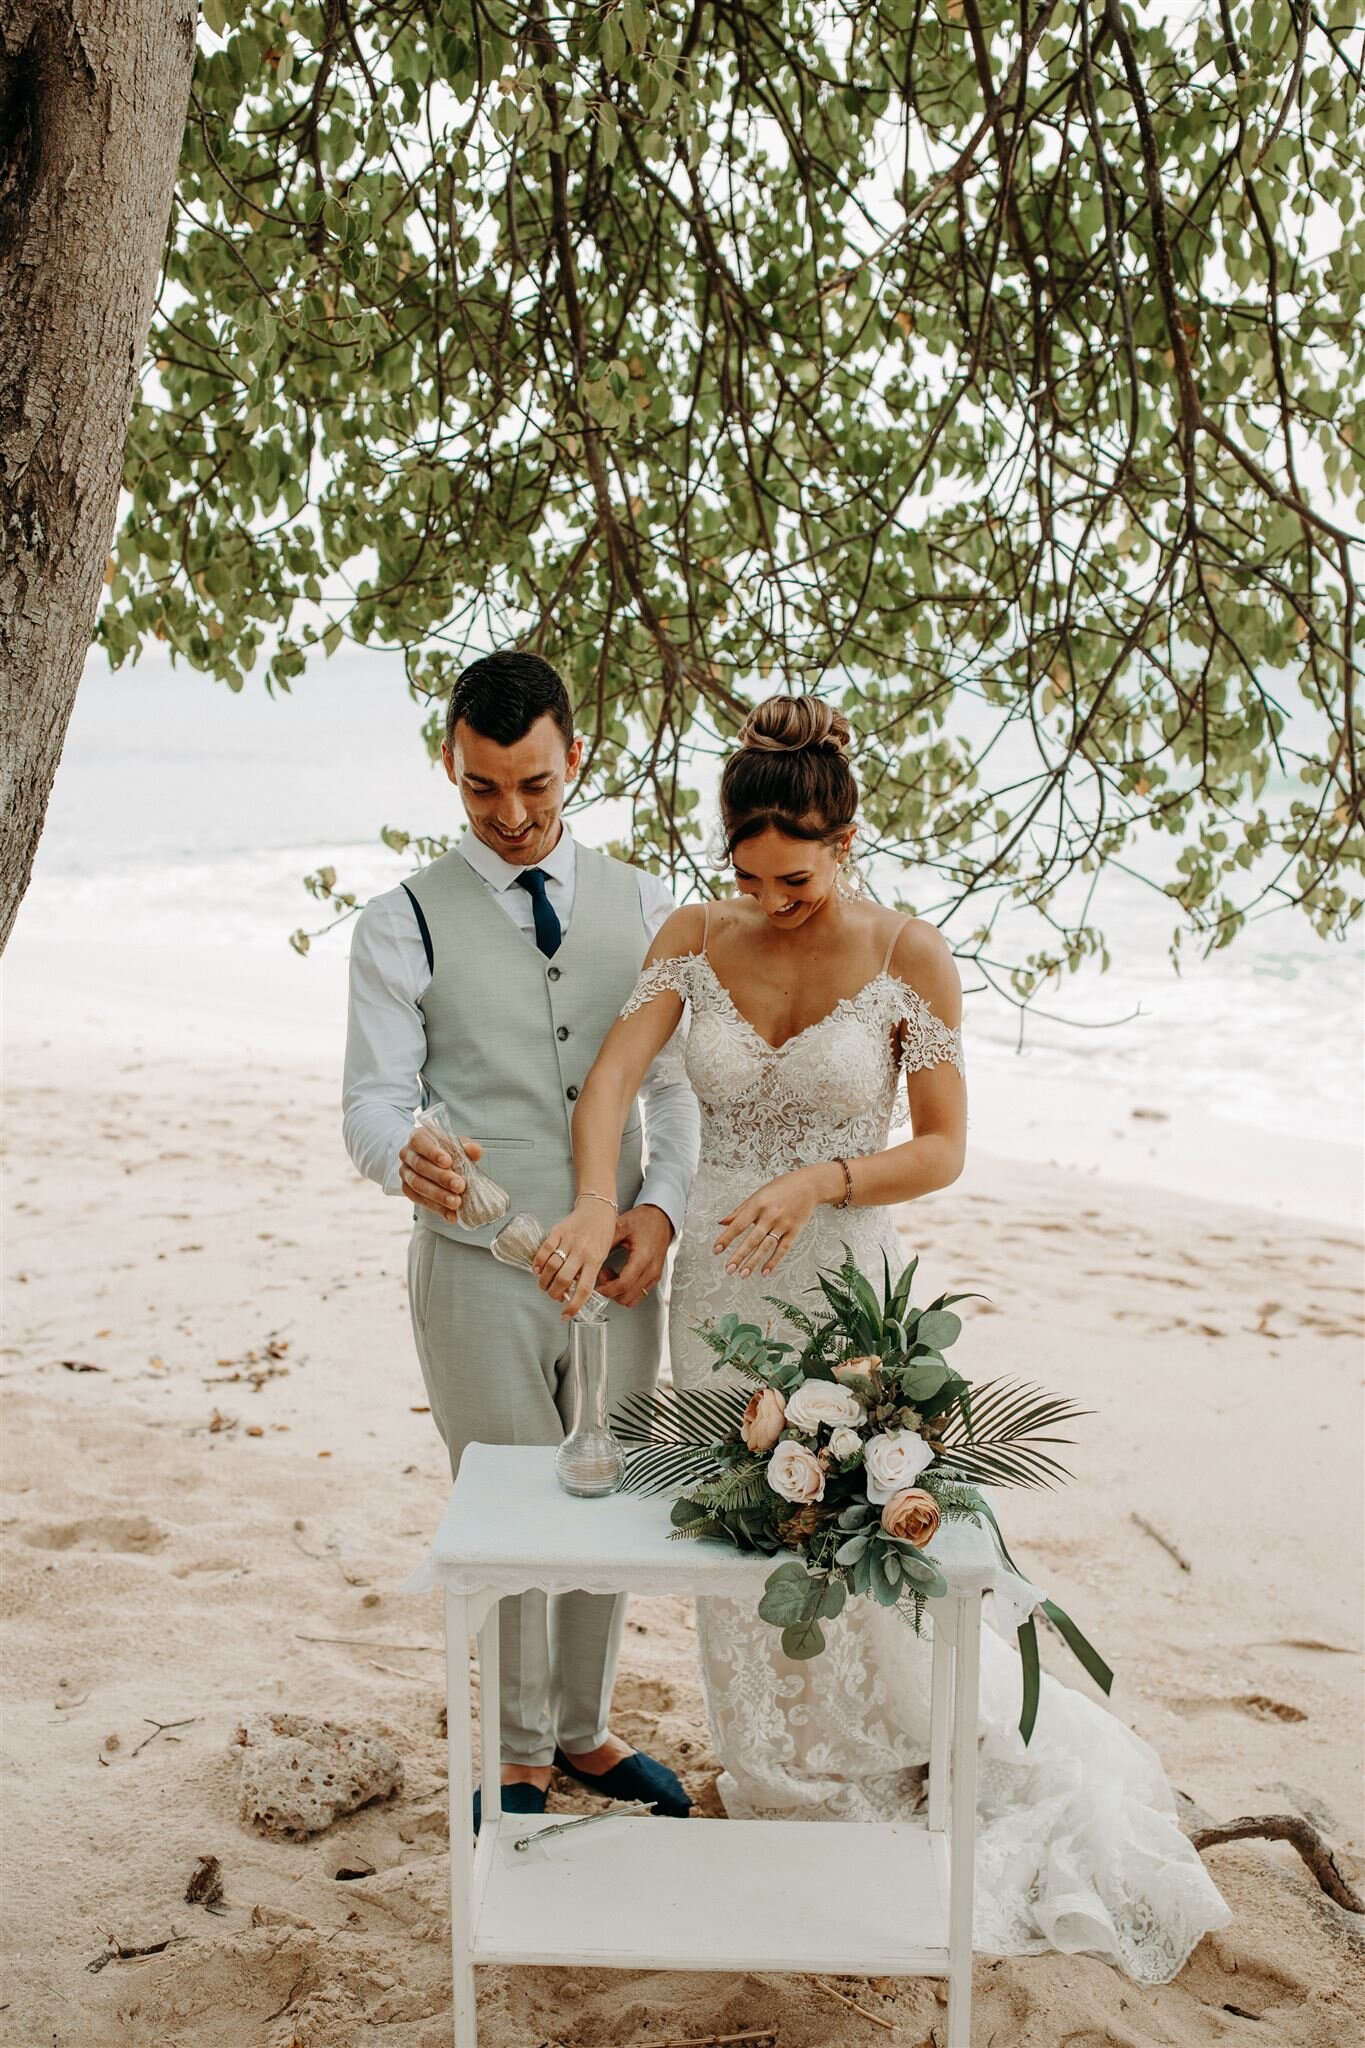 couple joins together pouring sand into a vase as part of their destination elopement beach ceremony. brides bouquet sits on a small white antique table as they smile together.